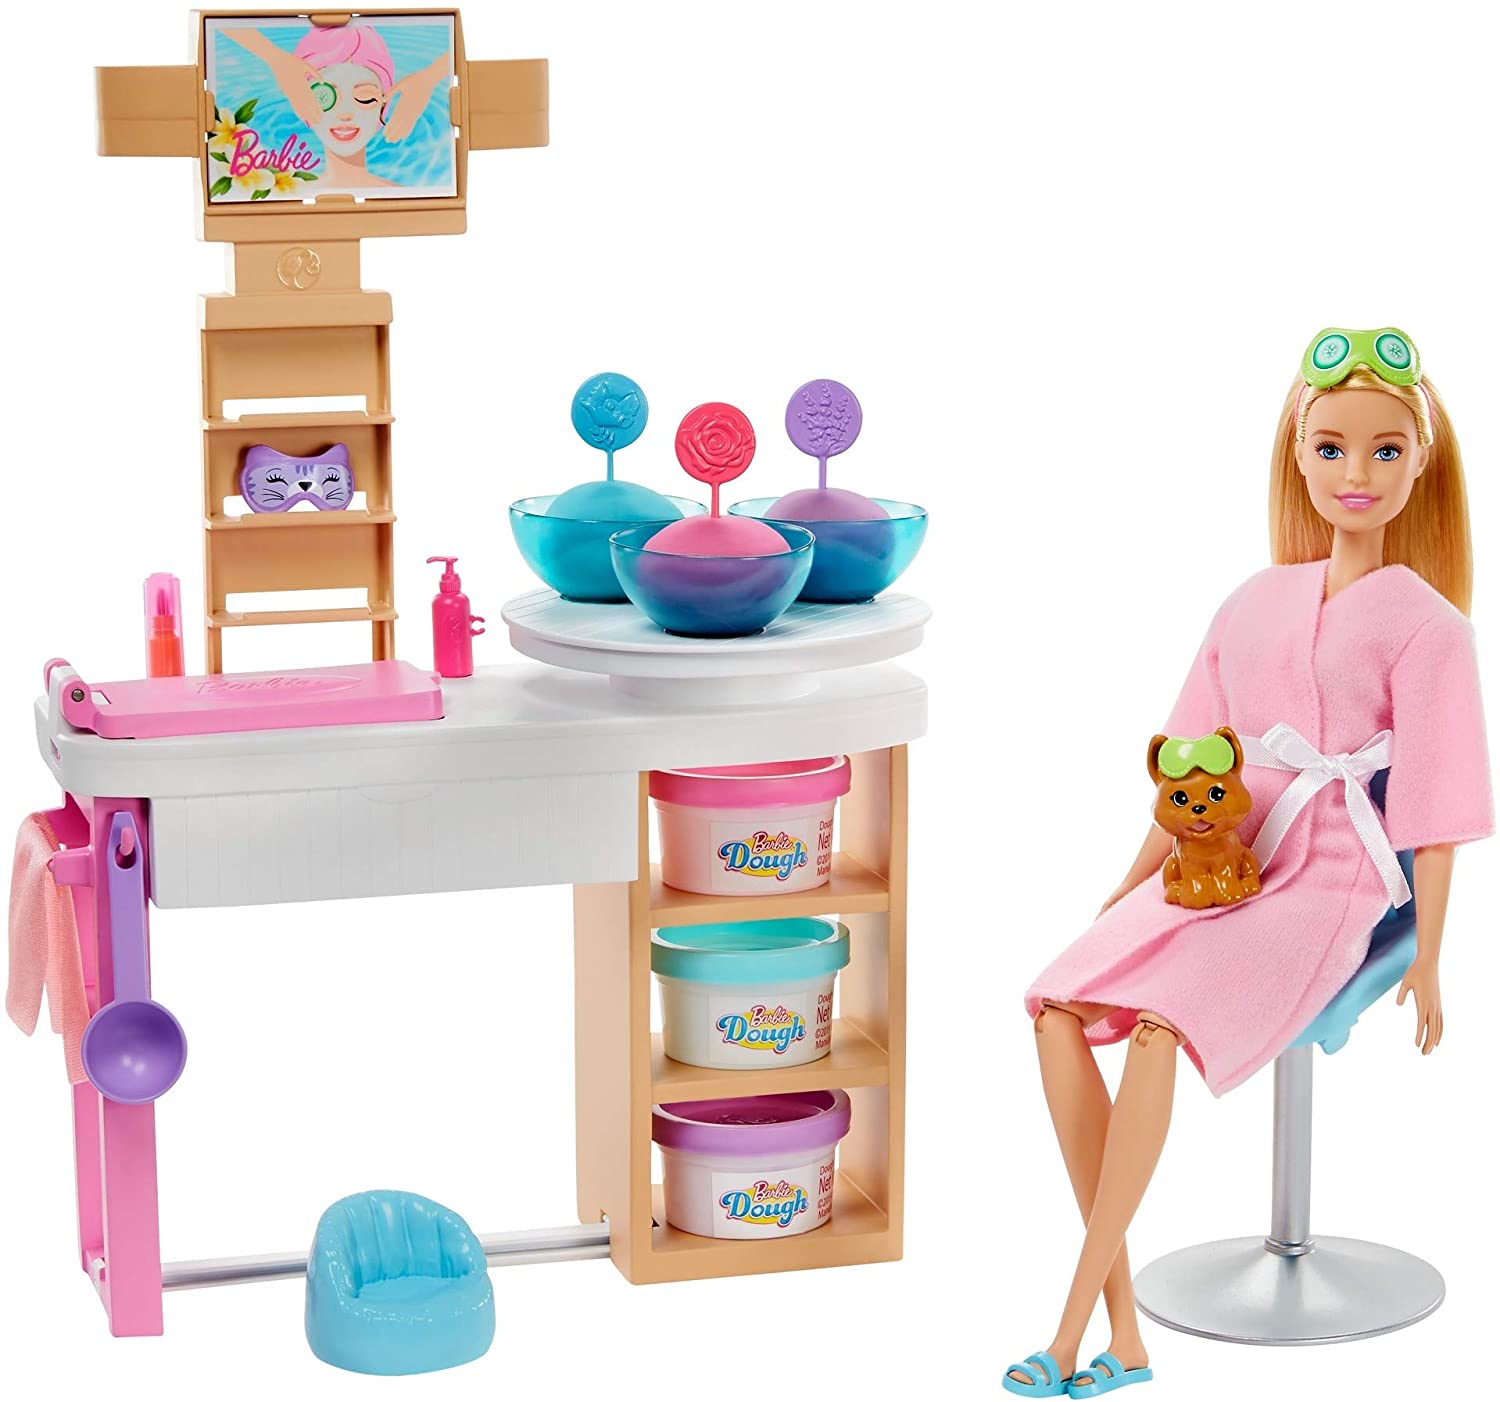 Review of Barbie Face Mask Spa Day Playset with Blonde Barbie Doll, Puppy, 3 Tubs